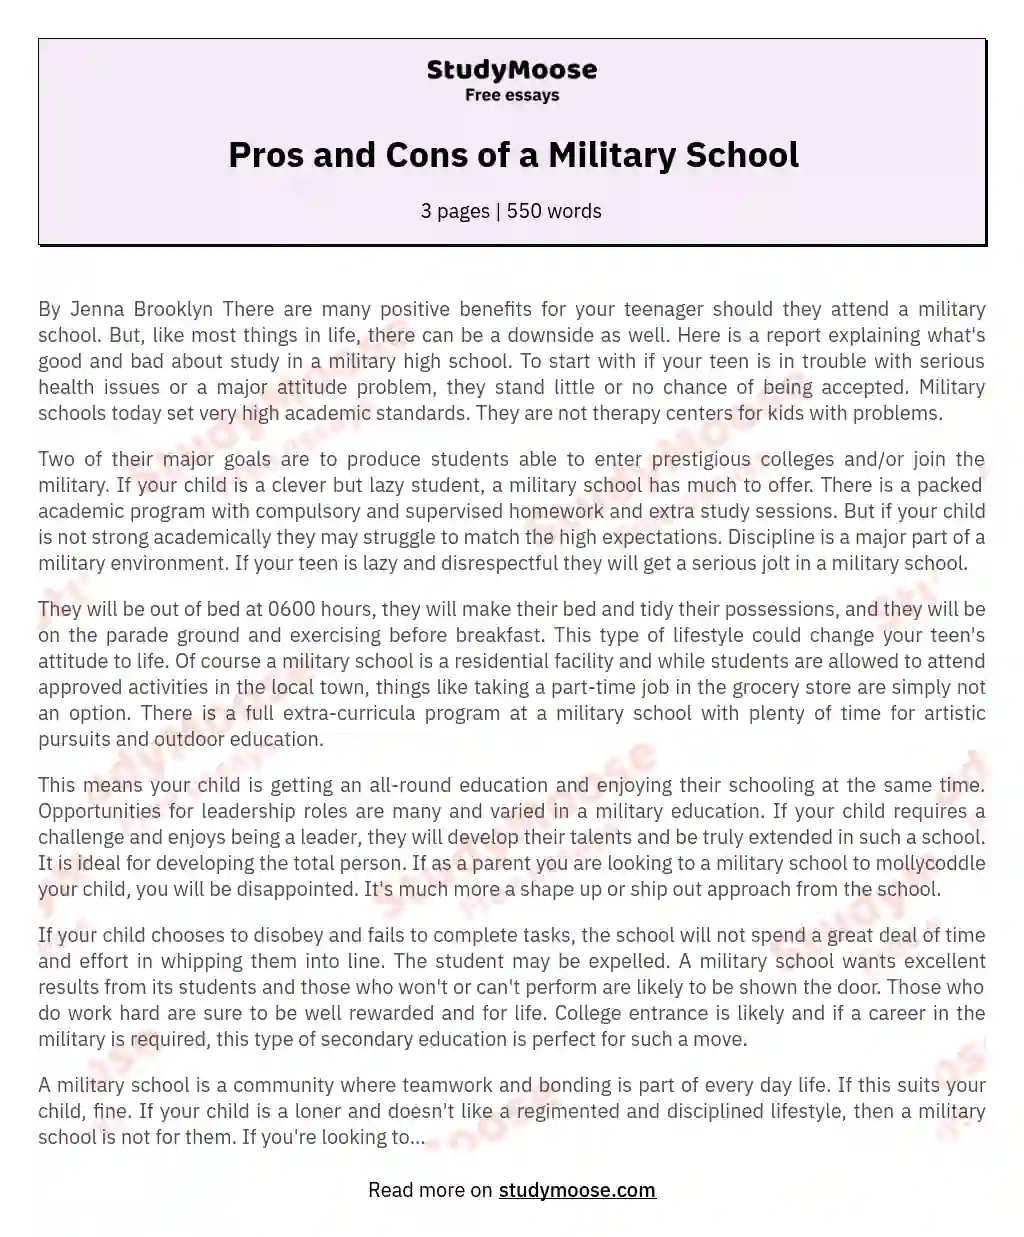 Pros and Cons of a Military School essay